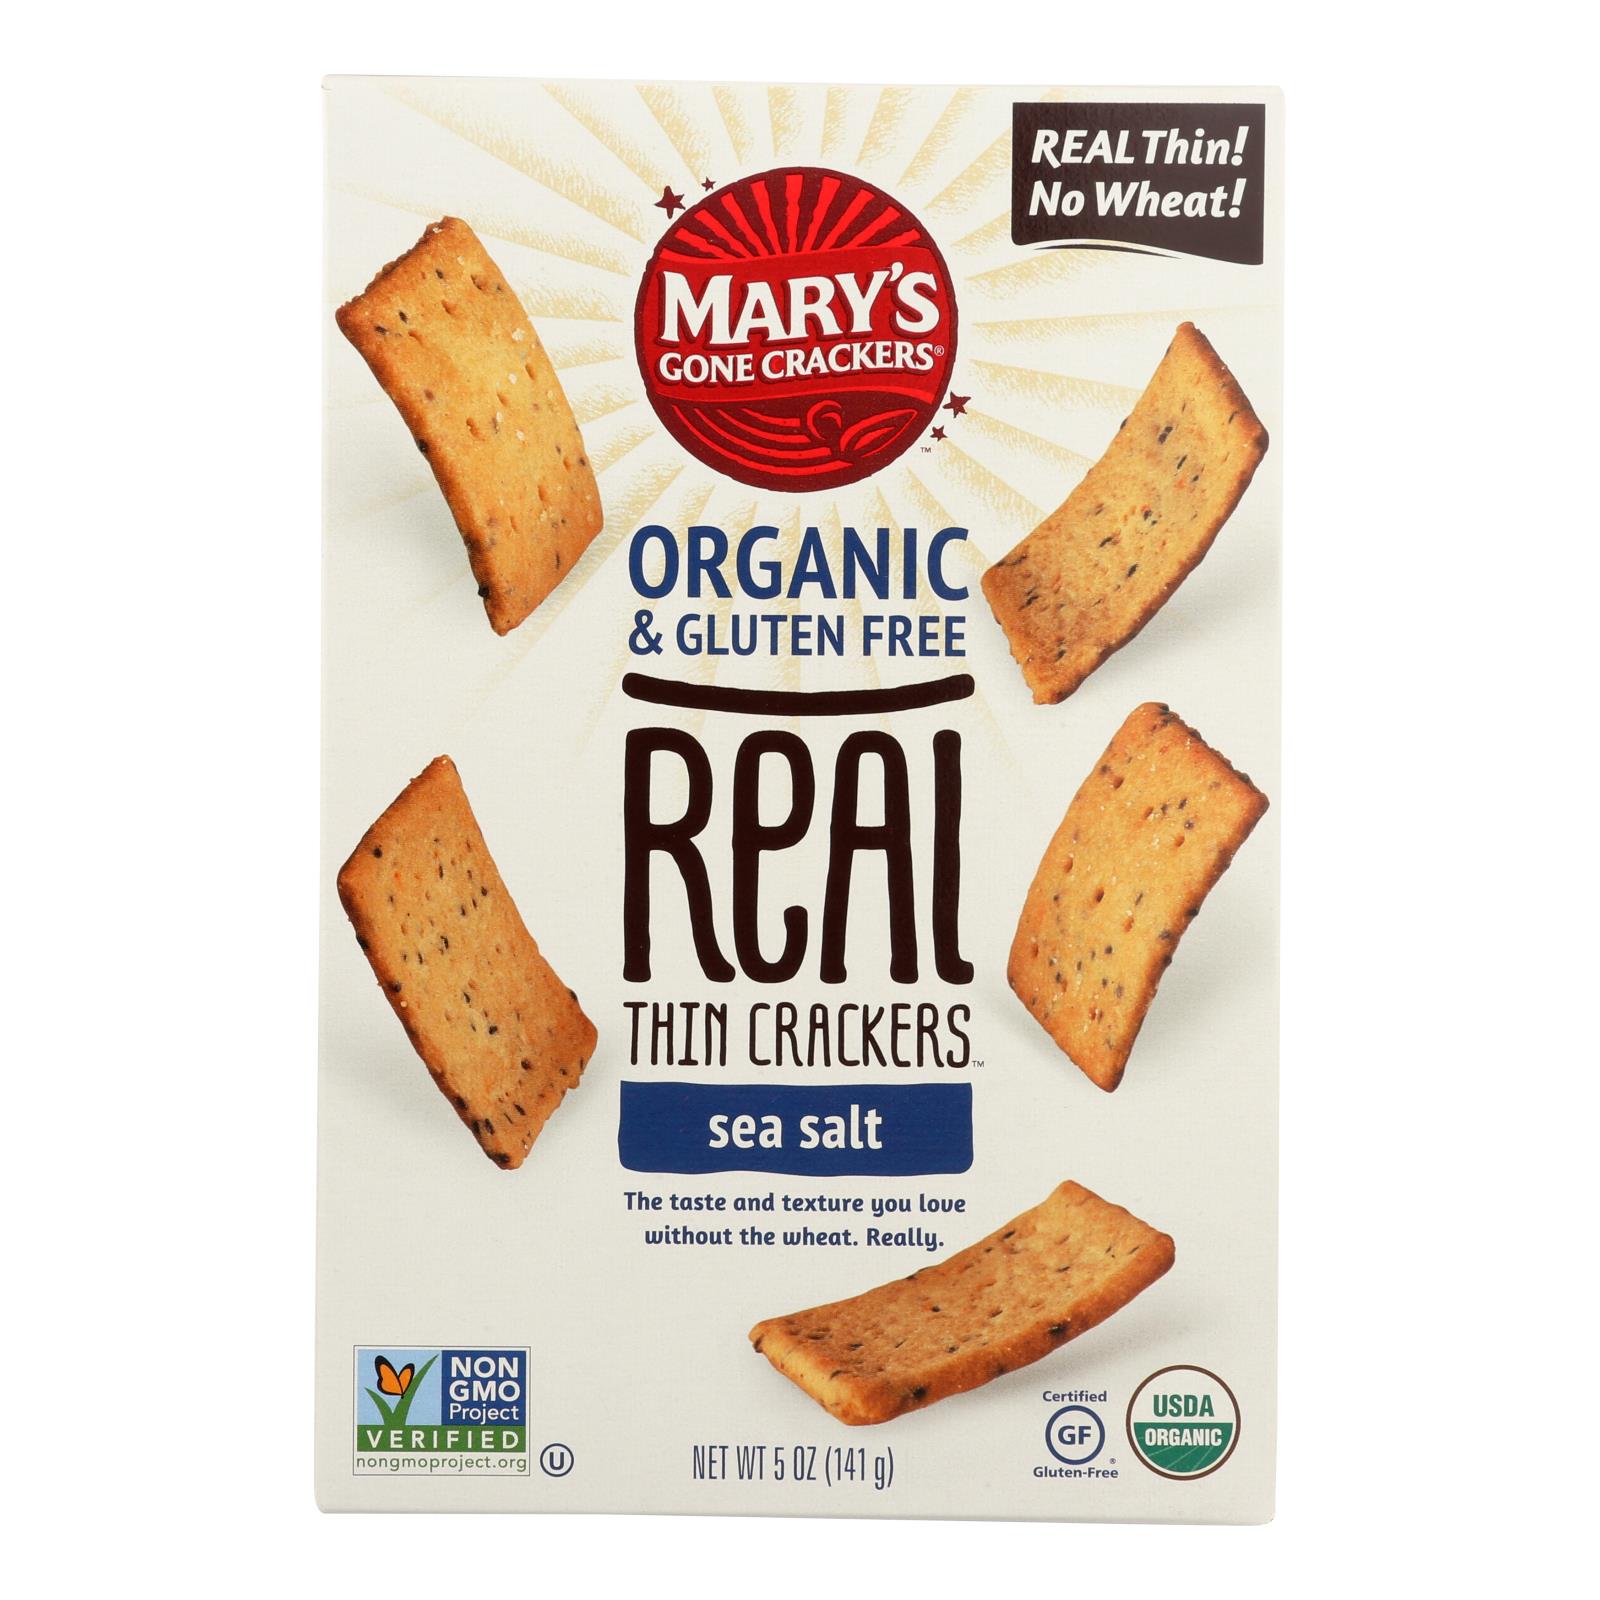 Mary's Gone Crackers Real Thin Crackers - 6개 묶음상품 - 5 OZ